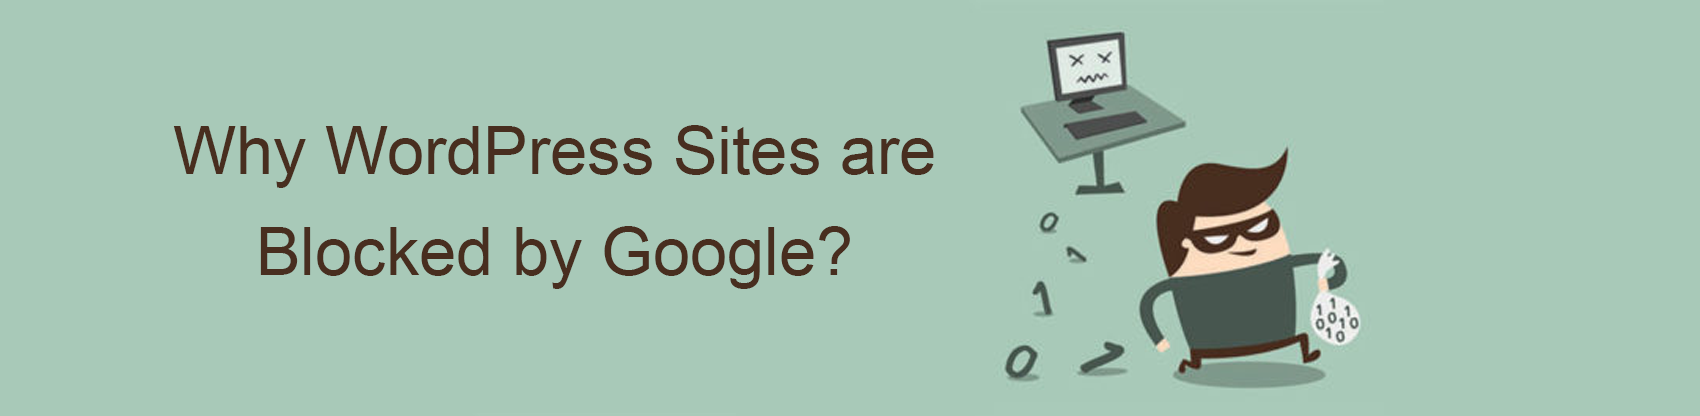 Why are WordPress Sites Blocked by Google?